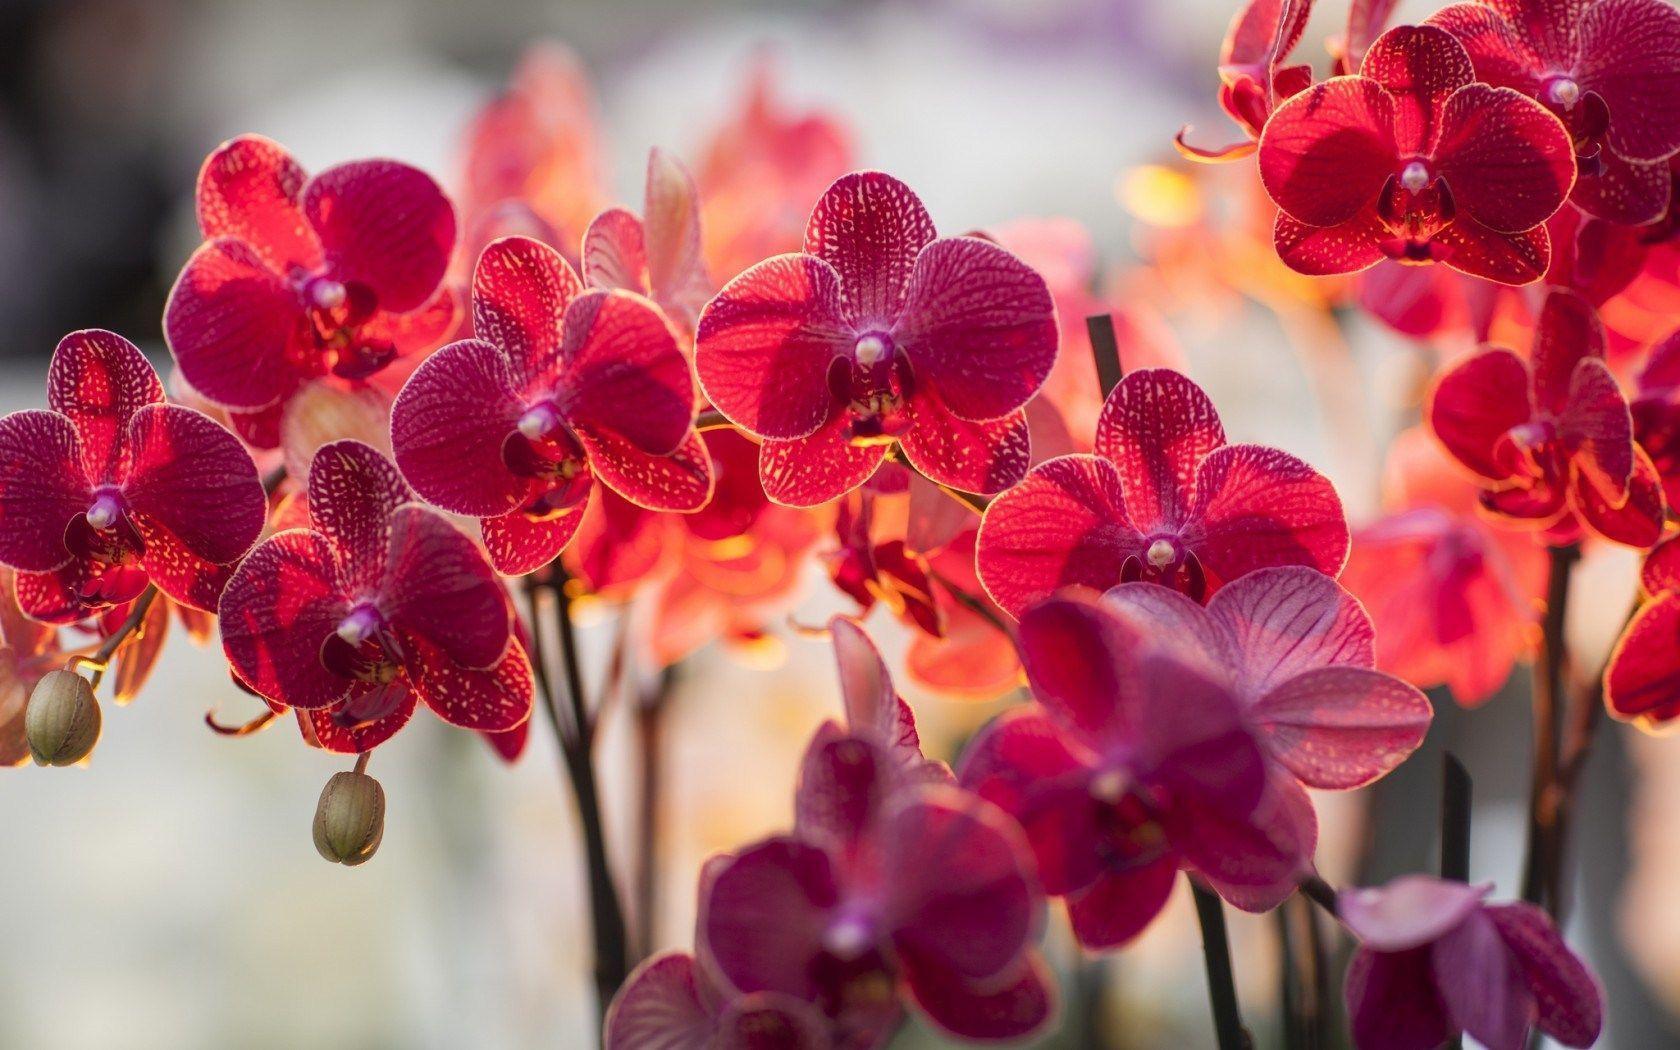 Red Phalaenopsis Orchid Flowers in Hotchpotch HD Wallpaper